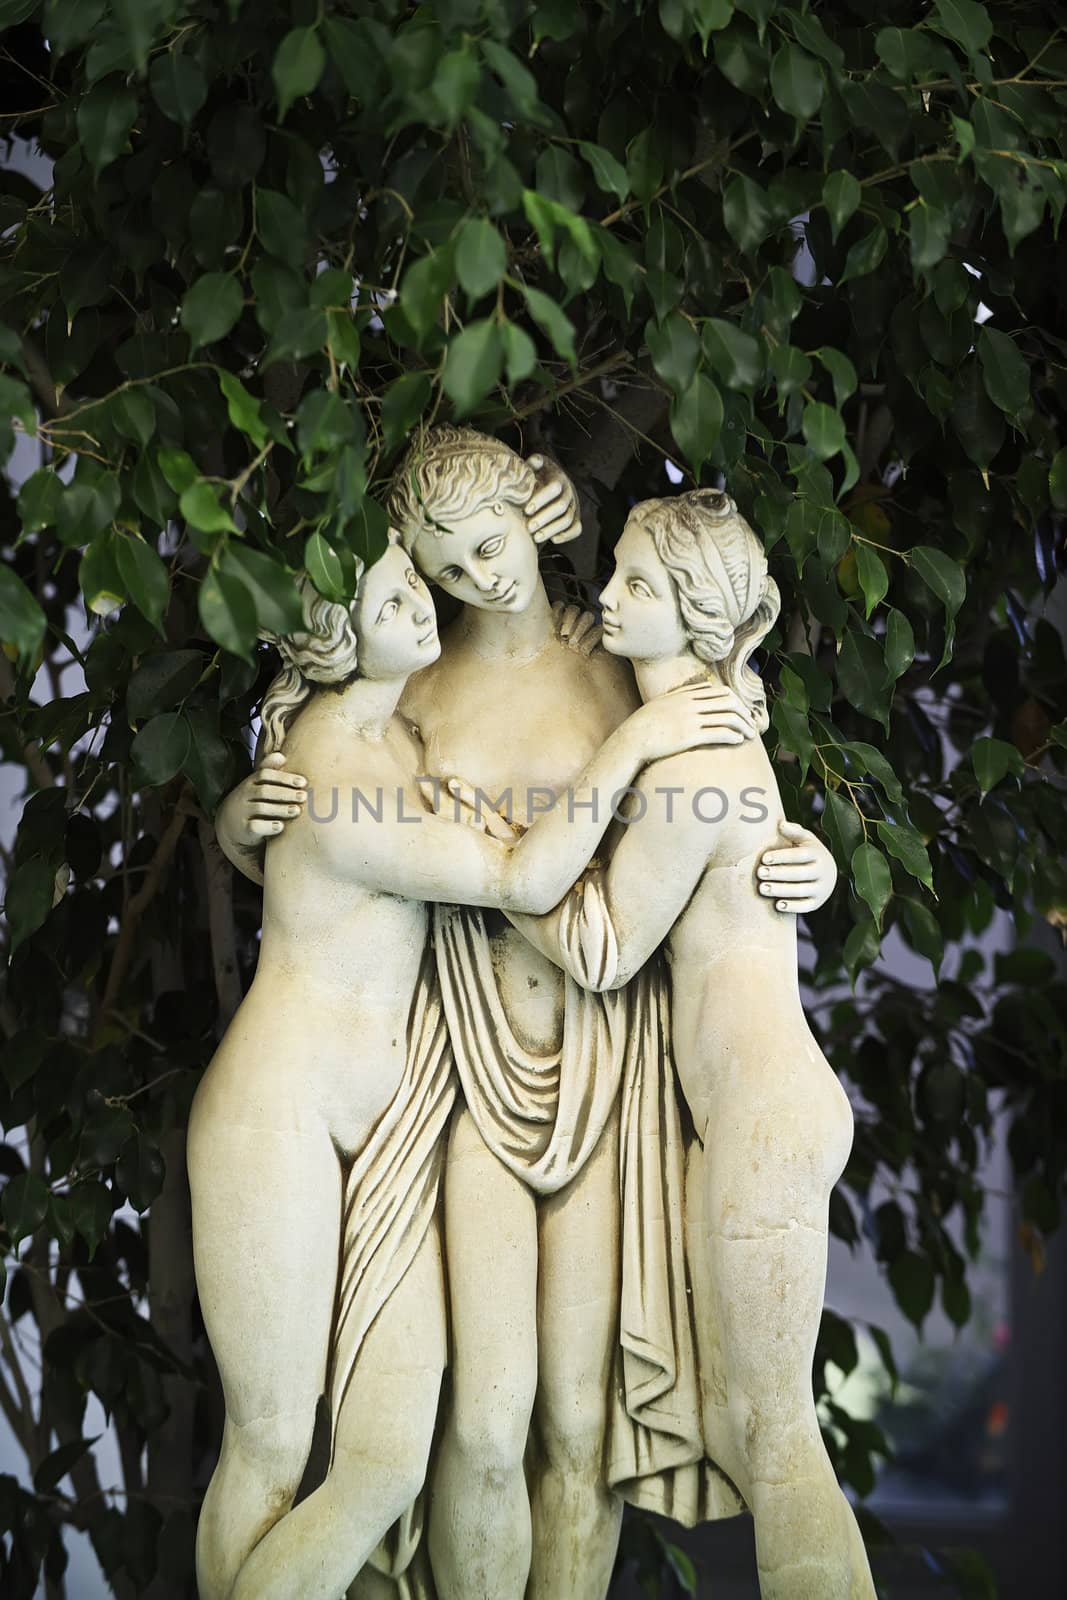 ITALY, Campania, Ischia island, S.Angelo, statues at the "Tropical Residence", a thermal hotel in S.Angelo